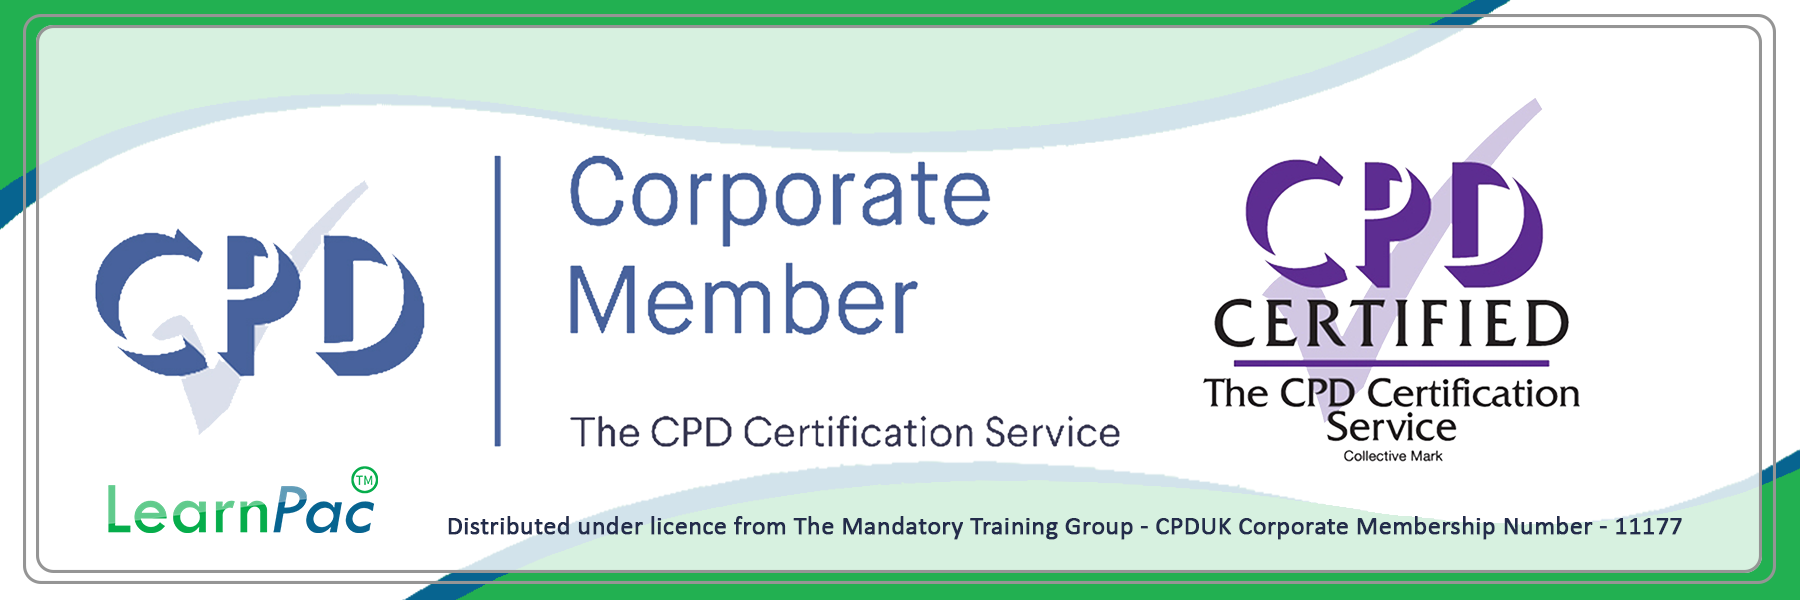 Clinical Skills Training Courses - E-Learning Courses with Certificates - CPD Certified - LearnPac Systems UK -